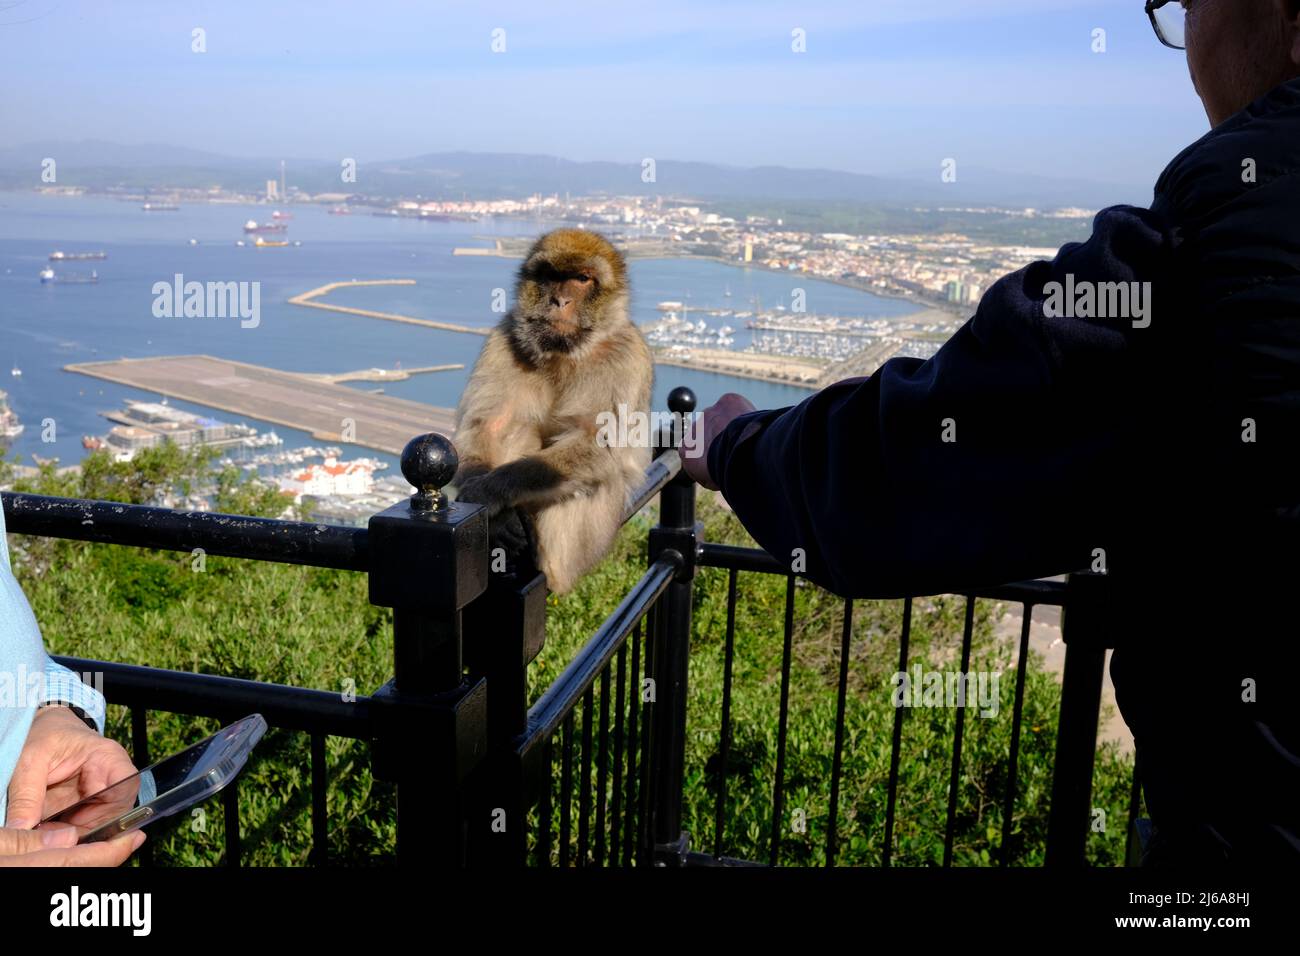 A Barbary Ape looking indifferently at a tourist trying to fist pump him in Gibraltar Stock Photo